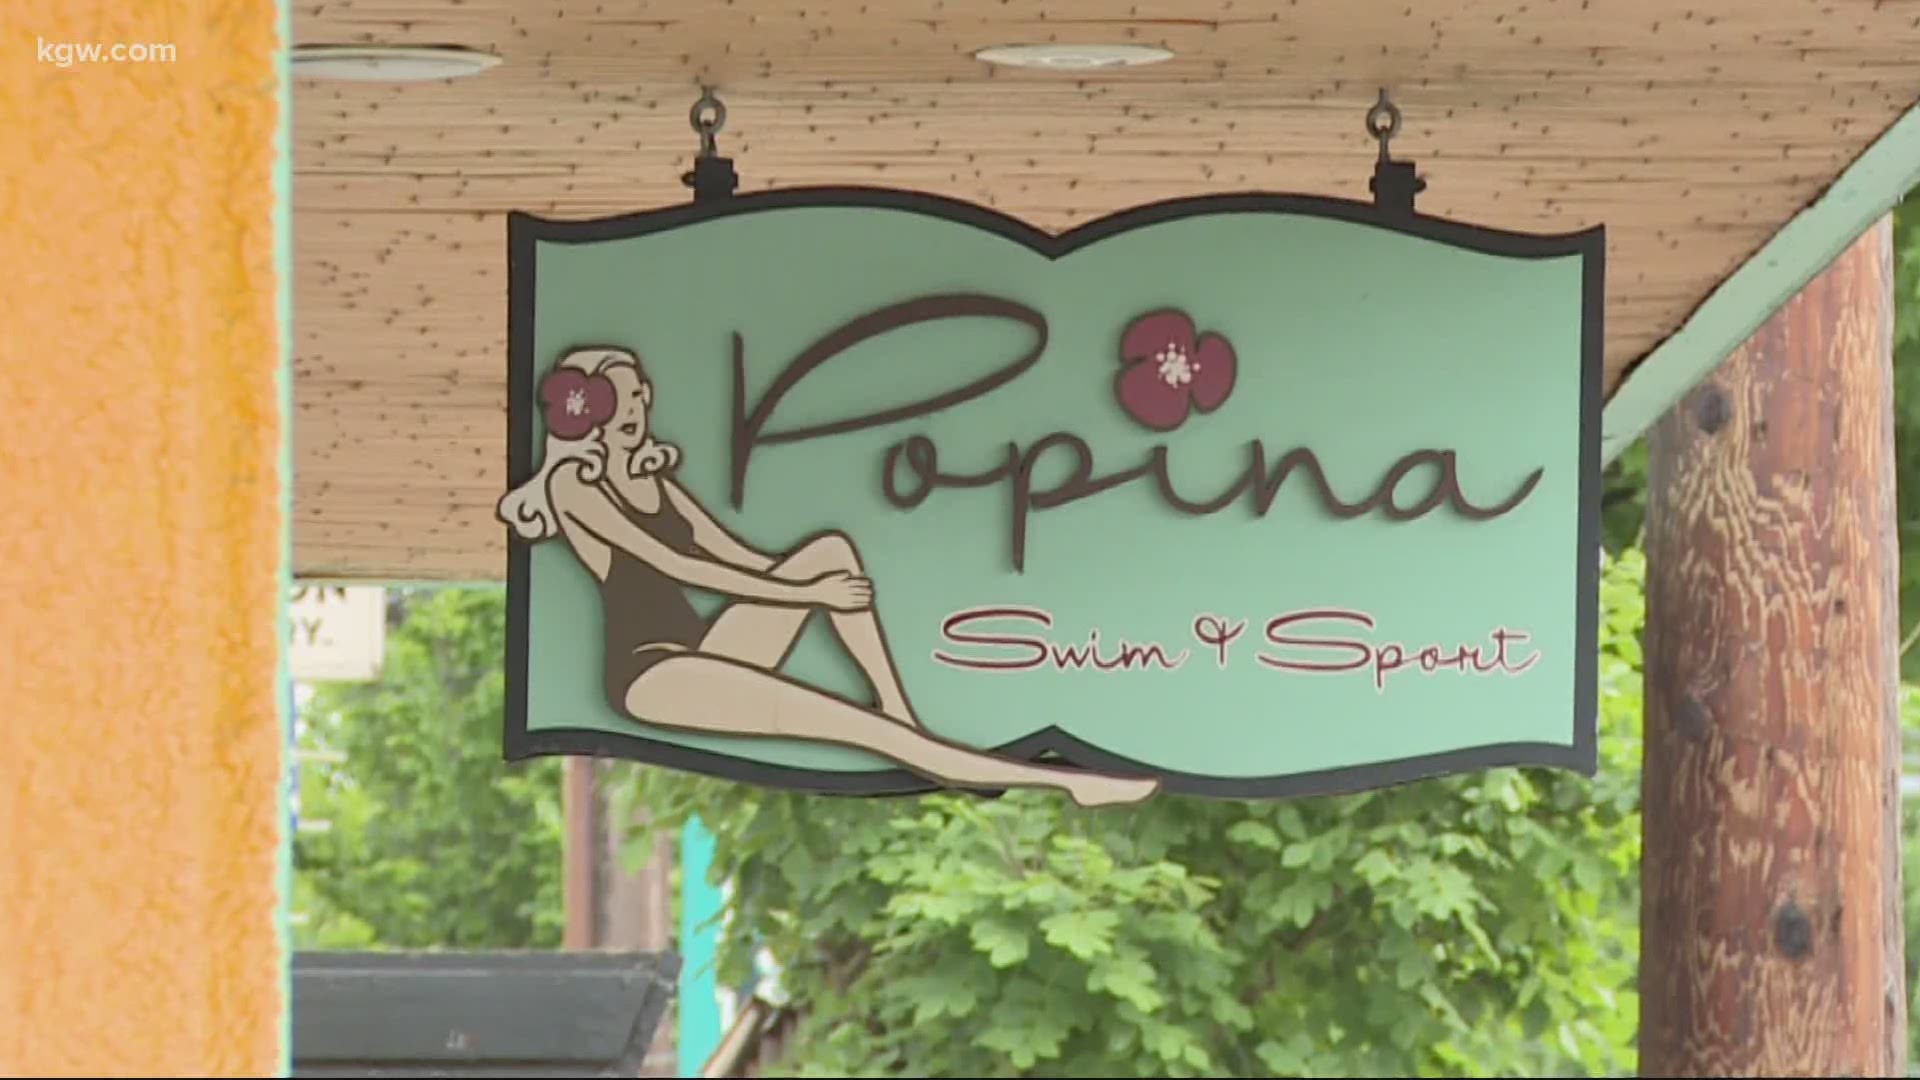 After a decade in the Pearl District, Popina Swimwear closes its doors.